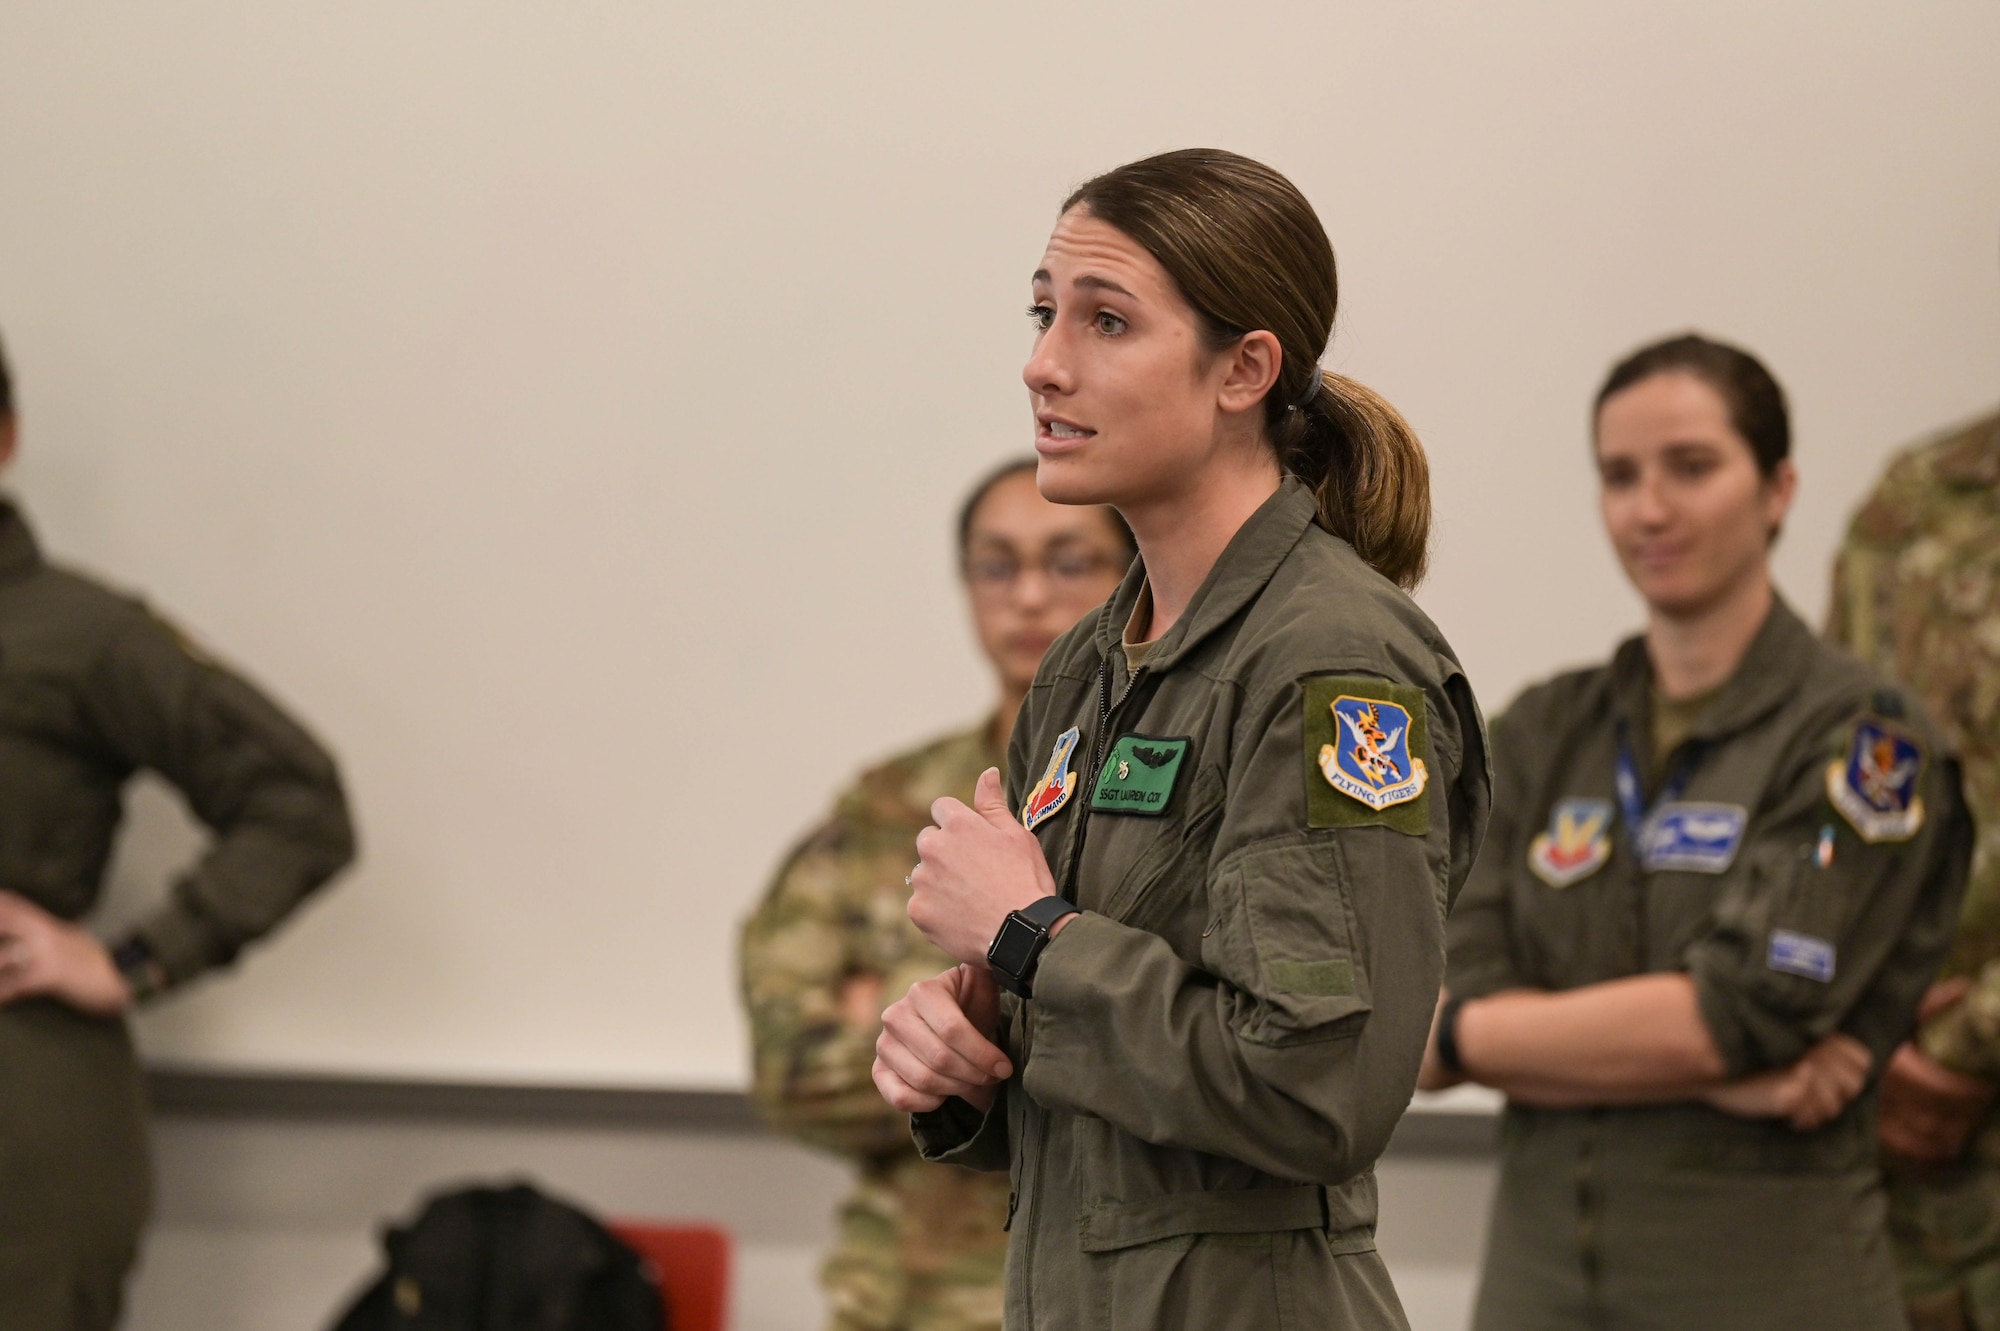 U.S. Air Force Staff Sgt. Lauren Kelly, 41st Rescue Squadron HH-60W Jolly Green II special mission aviator, talks to youth about what it’s like to be a woman in the military, March 10, 2022, at Lowndes High School, Valdosta, Georgia. Some students haven’t had any exposure to the military and had never met service members with such different jobs. (U.S. Air Force photo by Senior Airman Rebeckah Medeiros)